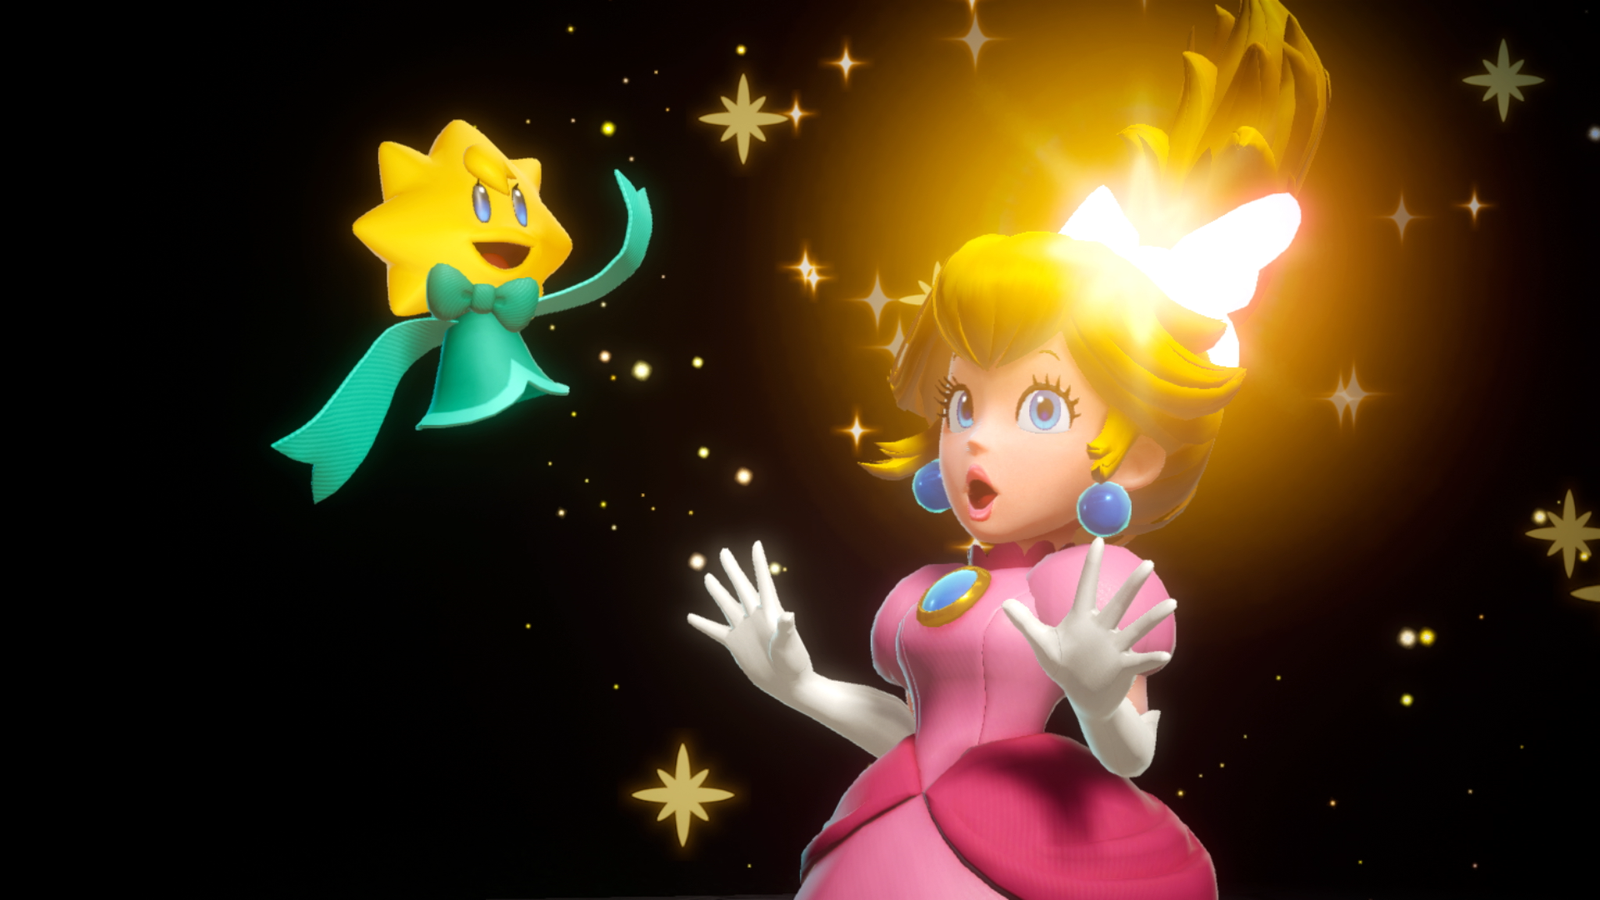 Princess Peach: Showtime! debuts on Nintendo Switch next year - The Verge